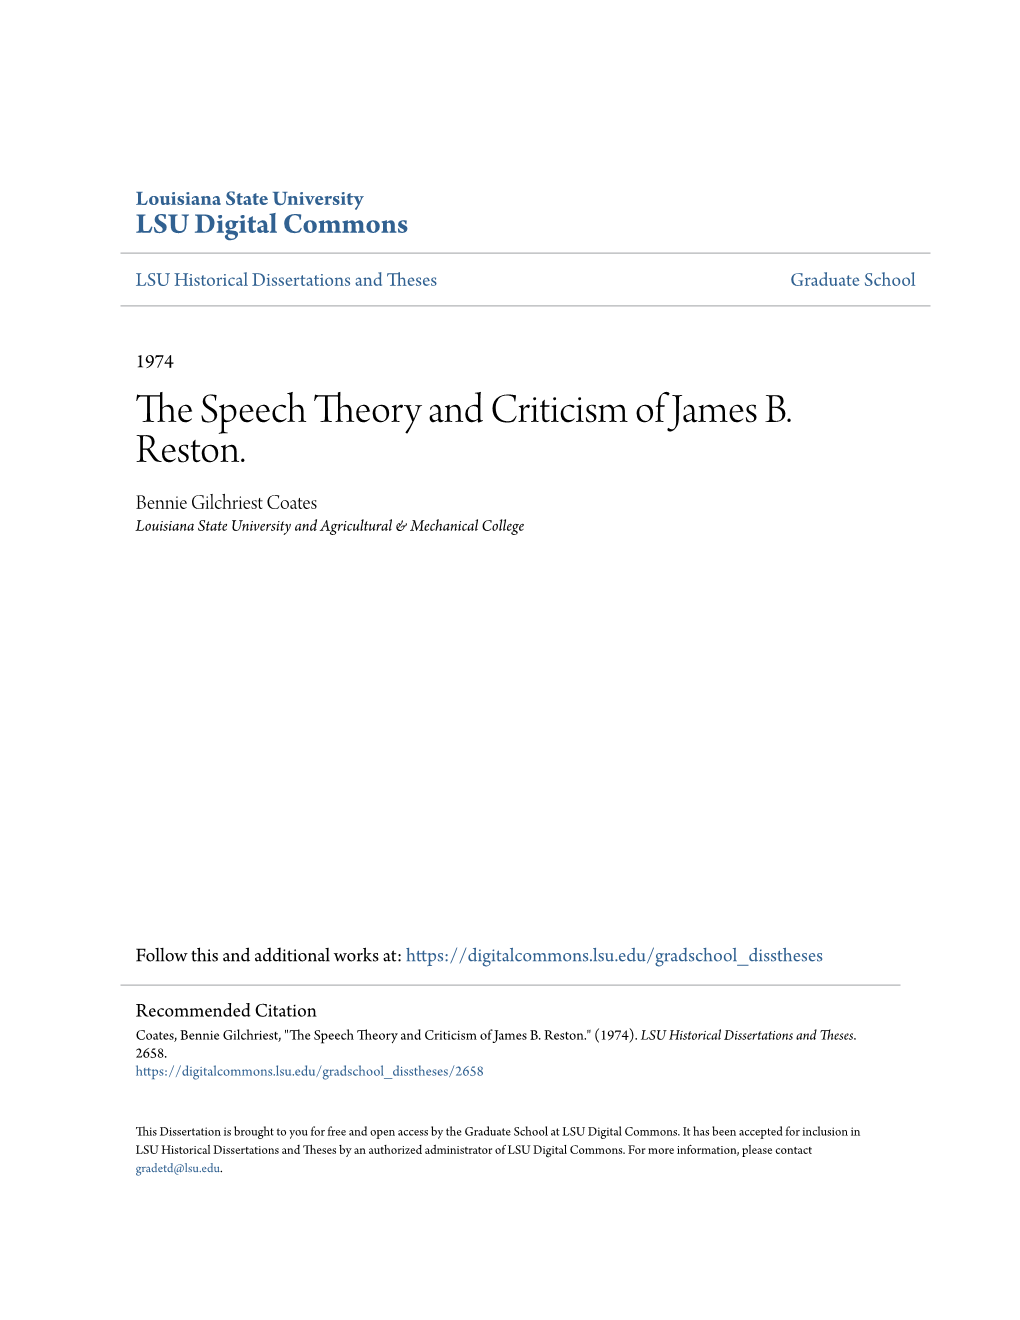 The Speech Theory and Criticism of James B. Reston